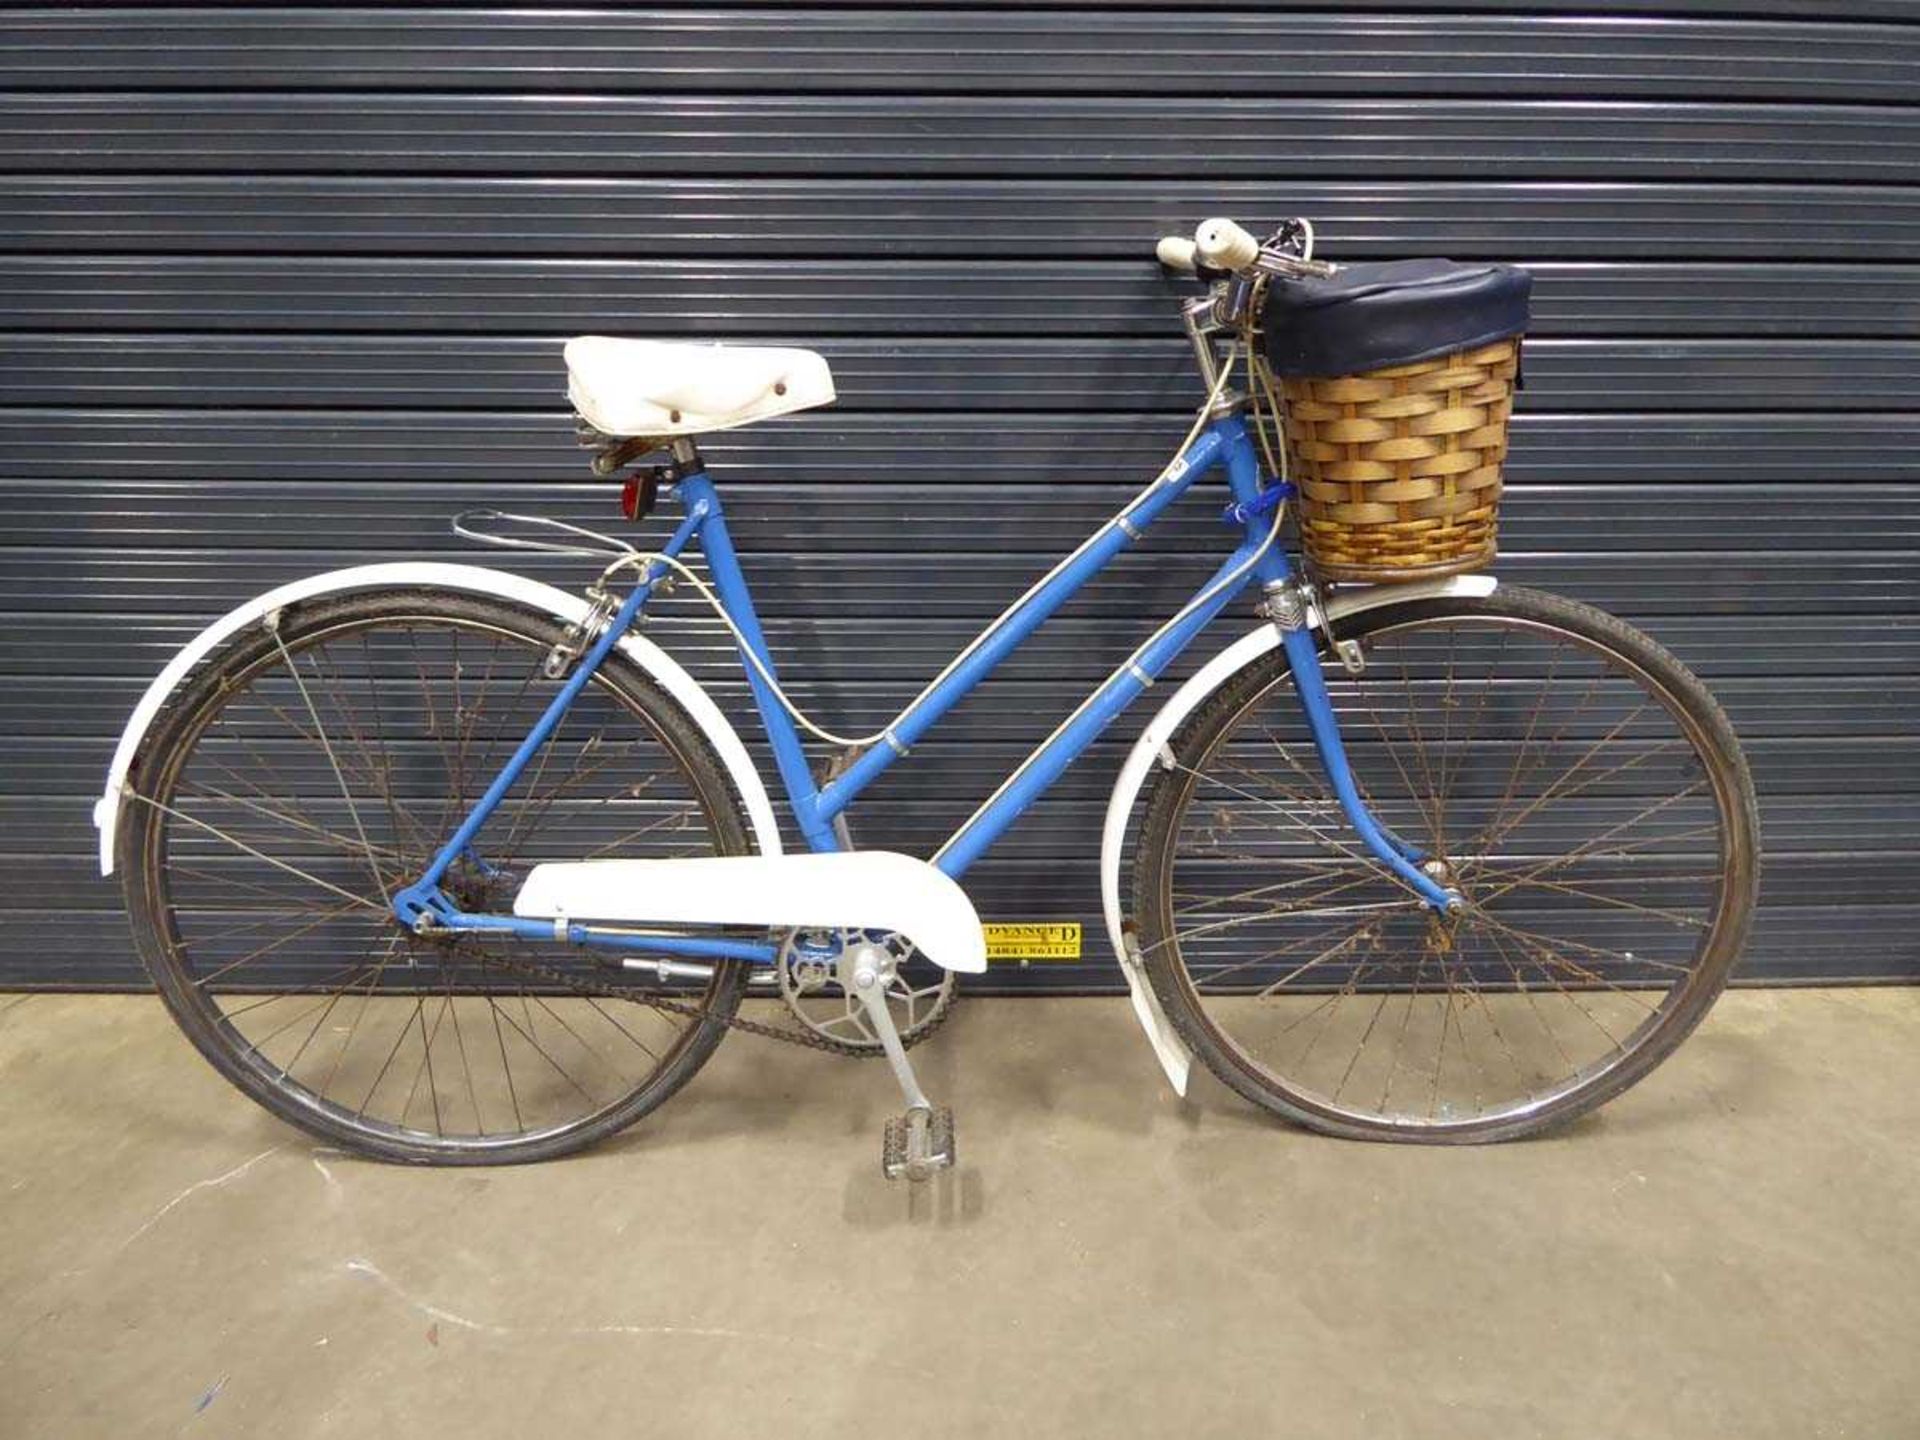 Blue and white lady's bike with front basket